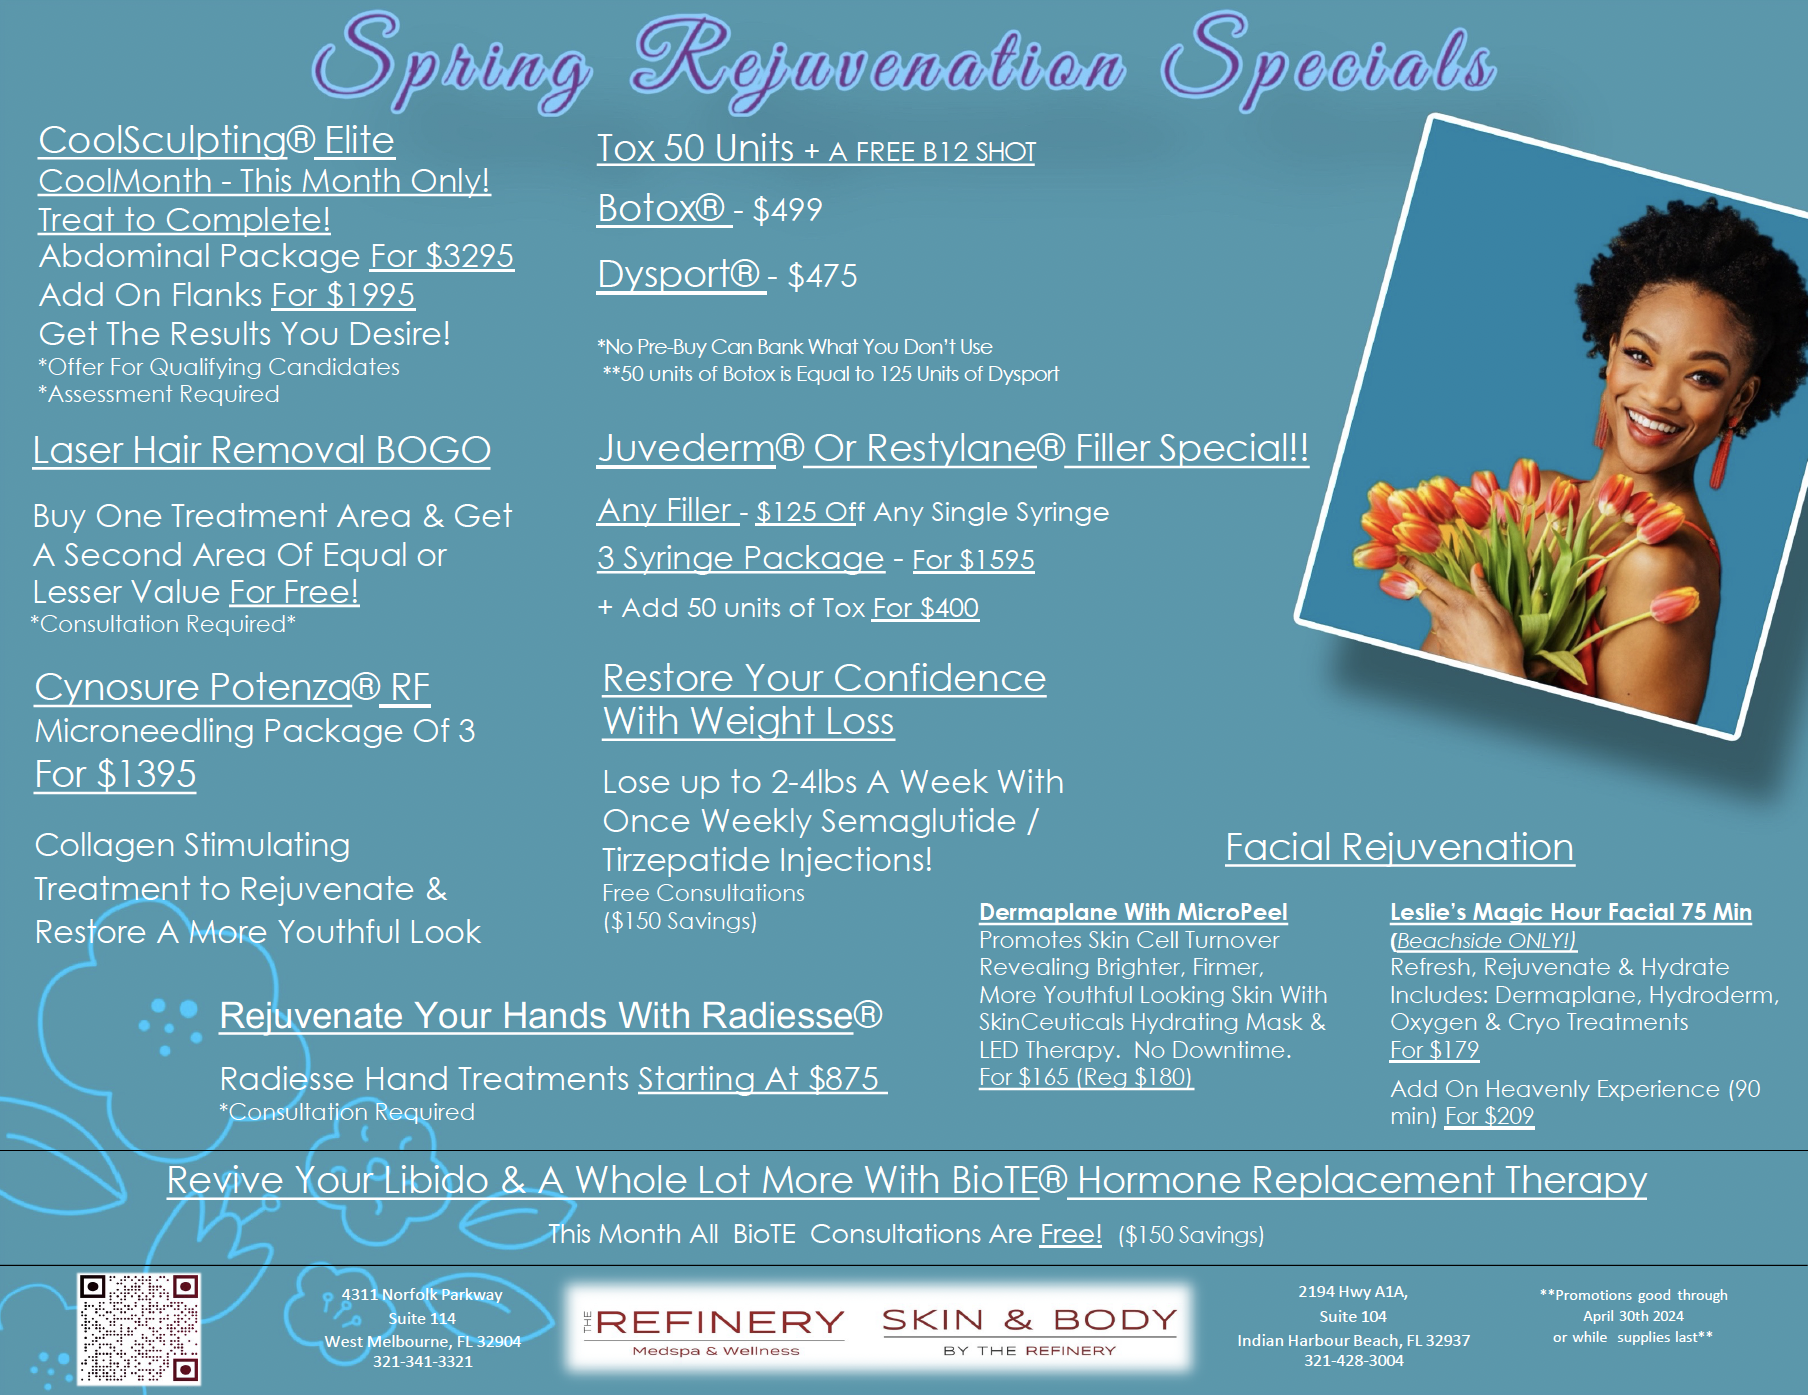 April Spring Rejuvenation Specials! Botox, Dysport, Juvederm, Restylane, CoolSculpting Elite, Laser Hair Removal, Radiesse, Semaglutide, Tirzepatide Weight Loss, BioTE Hormone Replacement Therapy and Rejuvenating Facials